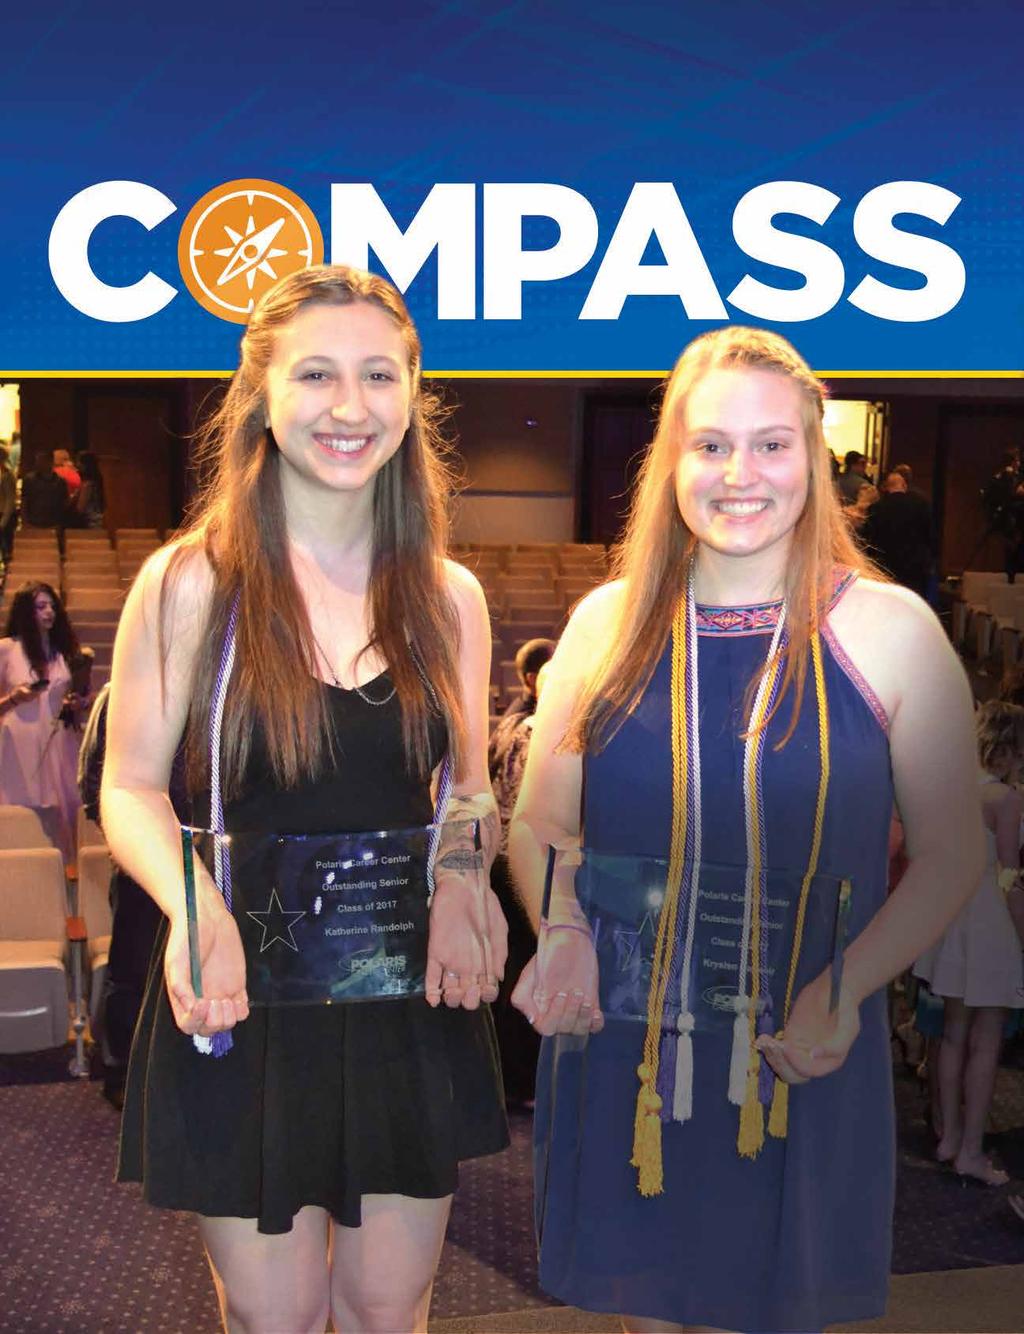 SUMMER 2017 EDITION INSIDE THIS ISSUE ON PAGE 5 POLARIS HONORS THE BEST OF 2017 STUDENTS OF THE YEAR KATHERINE RANDOLPH AND KRYSTEN CASTENIR 2 3 4 6 Teacher